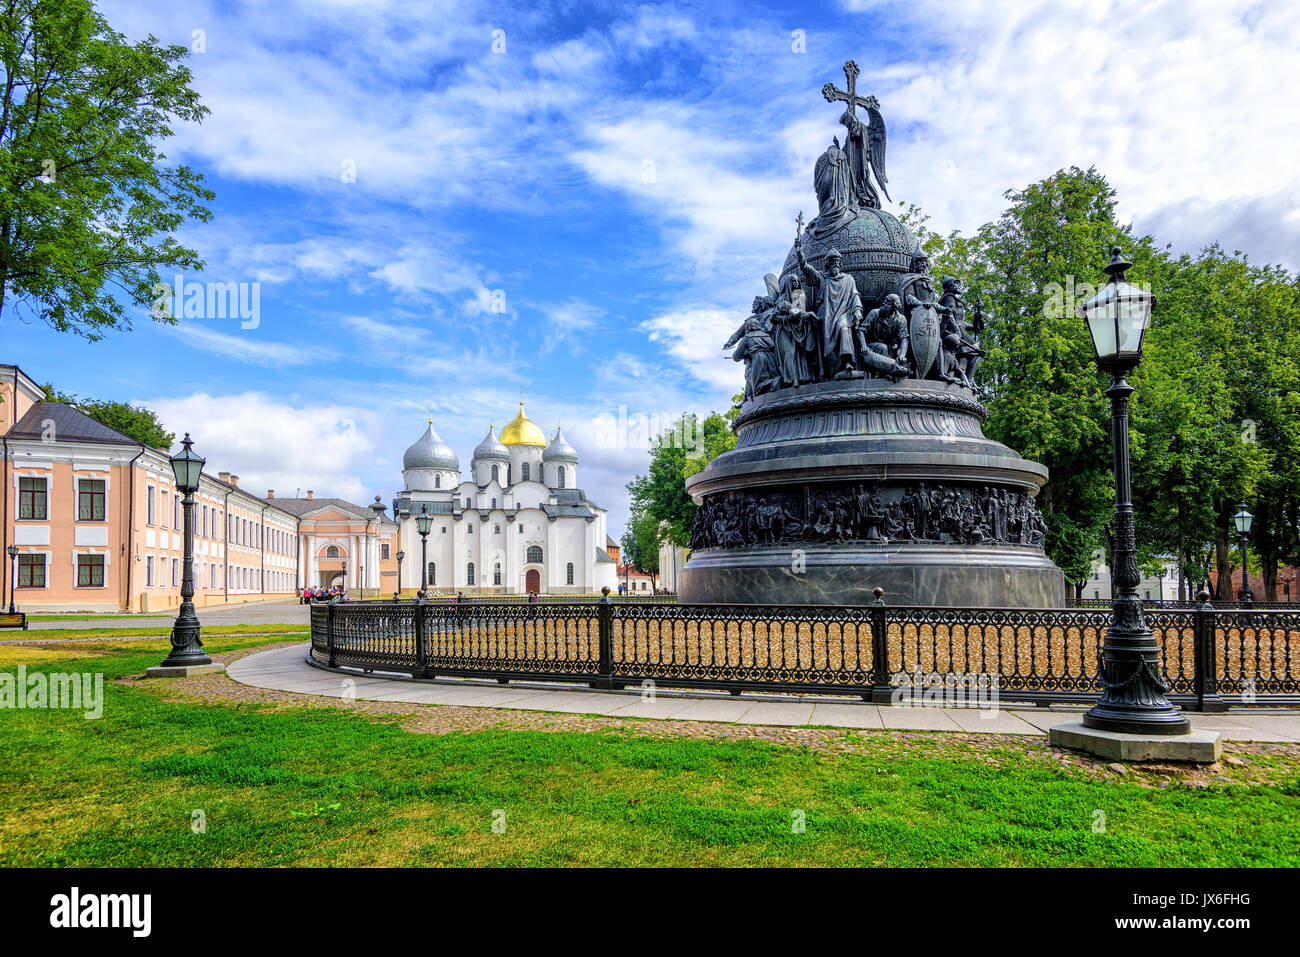 The Millennium of Russia bronze monument in the Novgorod Kremlin with Saint Sophia Cathedral in the background, Russian Federation Stock Photo